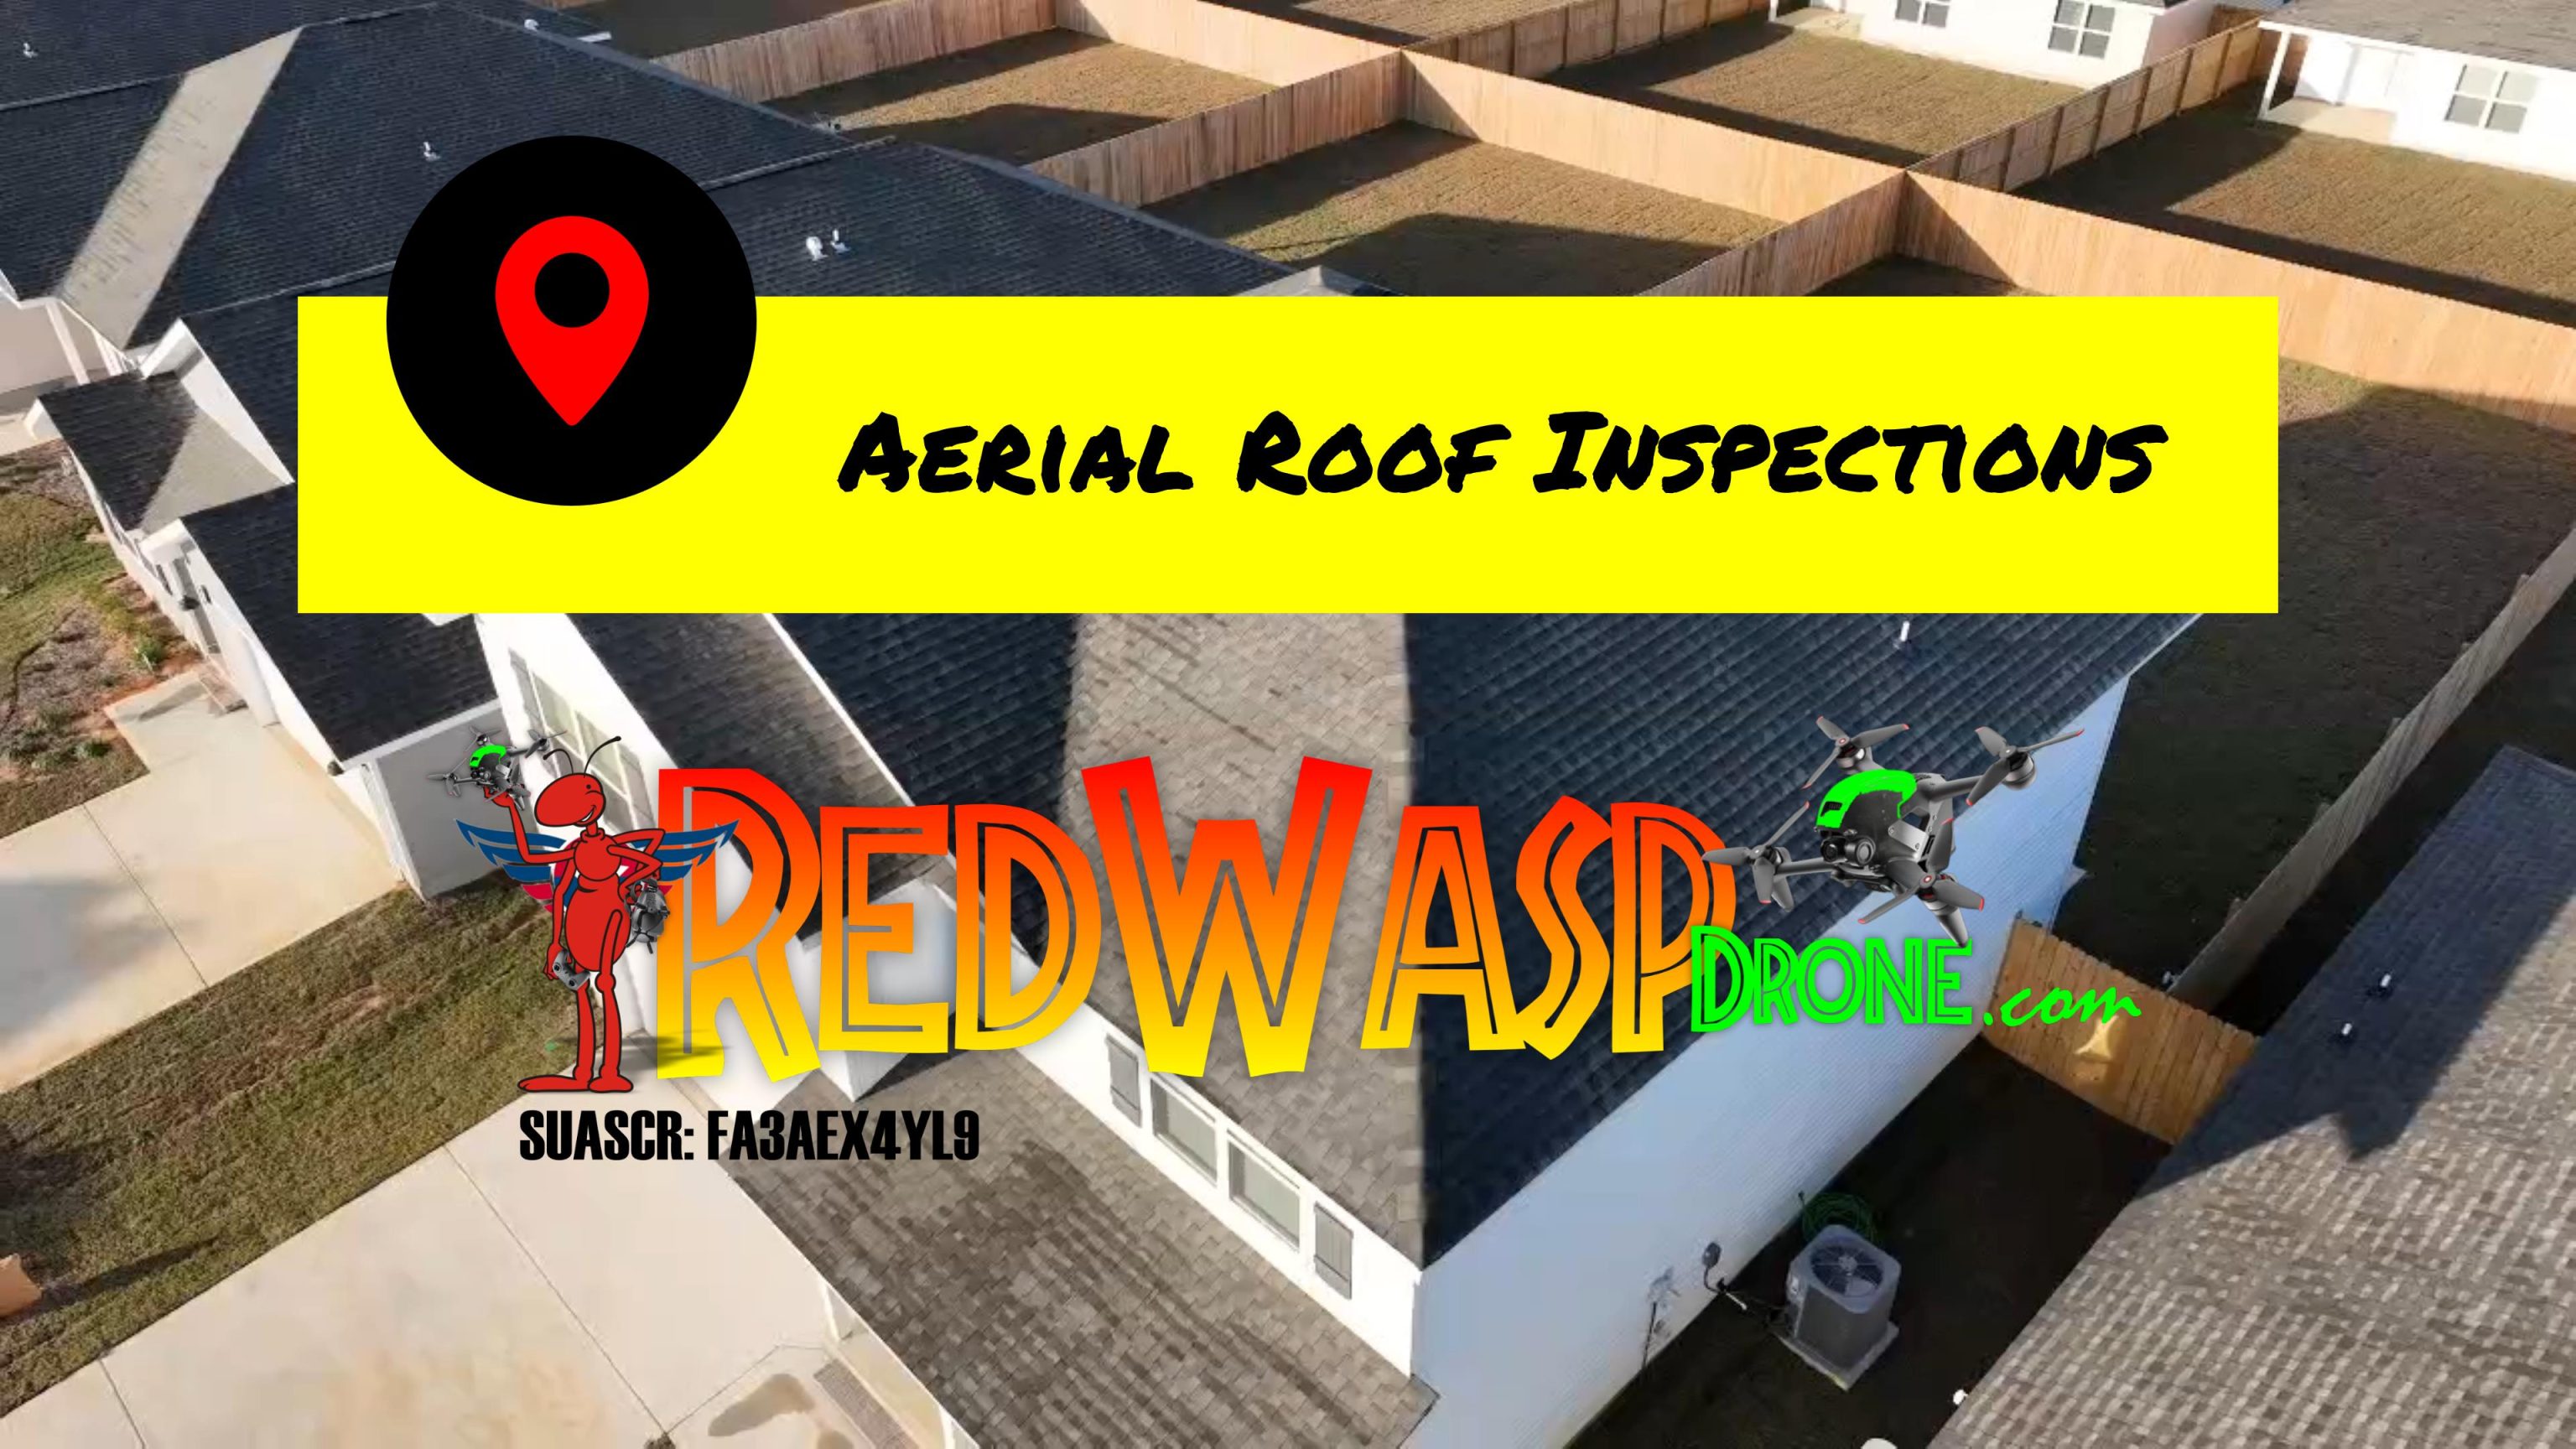 Why use drone for roof inspections by Red Wasp Drone